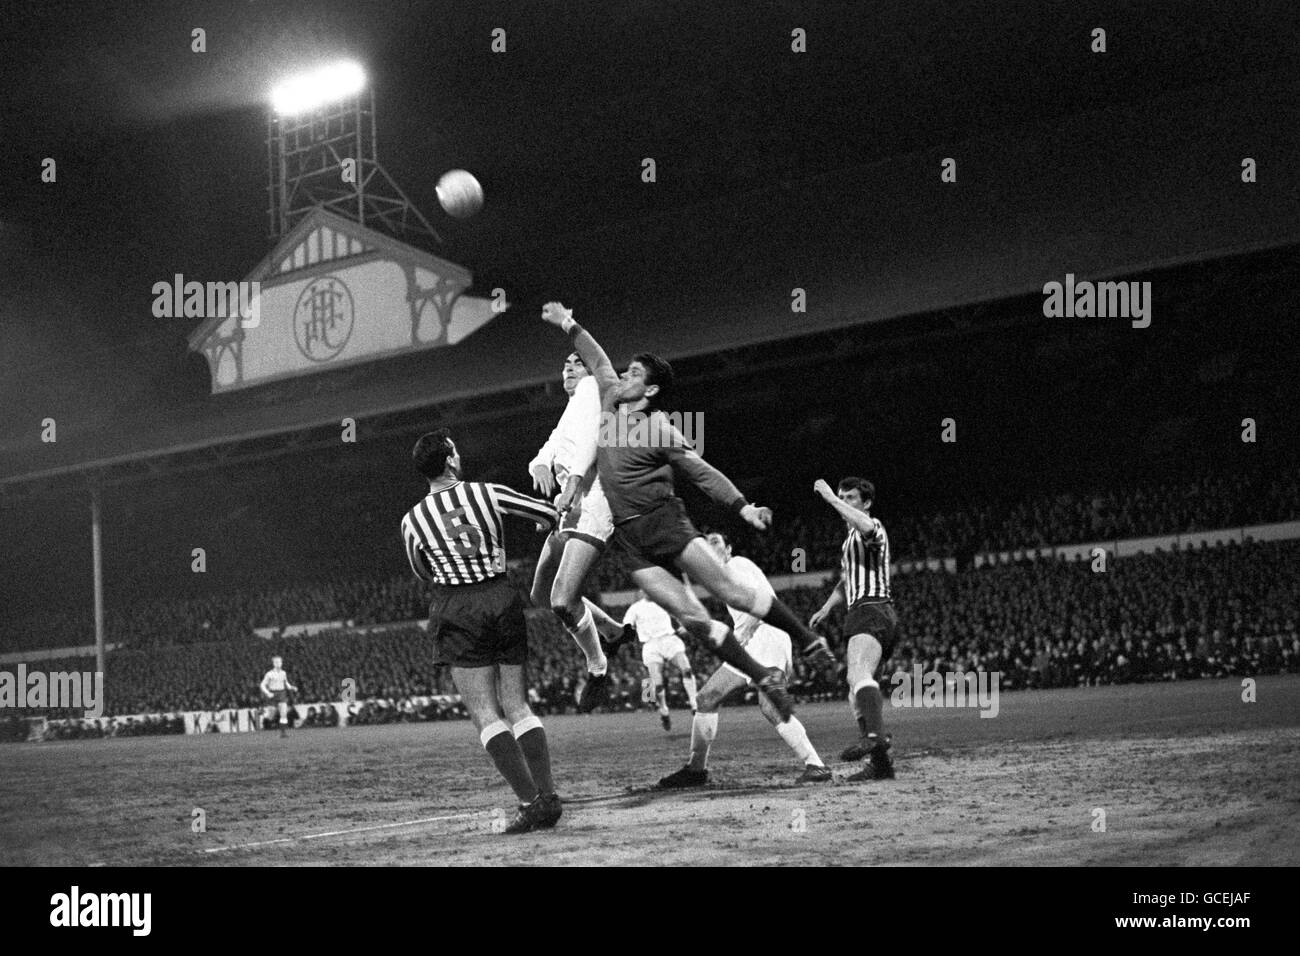 Soccer - FA Cup - Third Round Replay - Tottenham Hotspur v Millwall - White Hart Lane. Millwall goalkeeper Lawrie Leslie leaps high to clear the ball from the head of Spurs' Alan Gilzean. Stock Photo